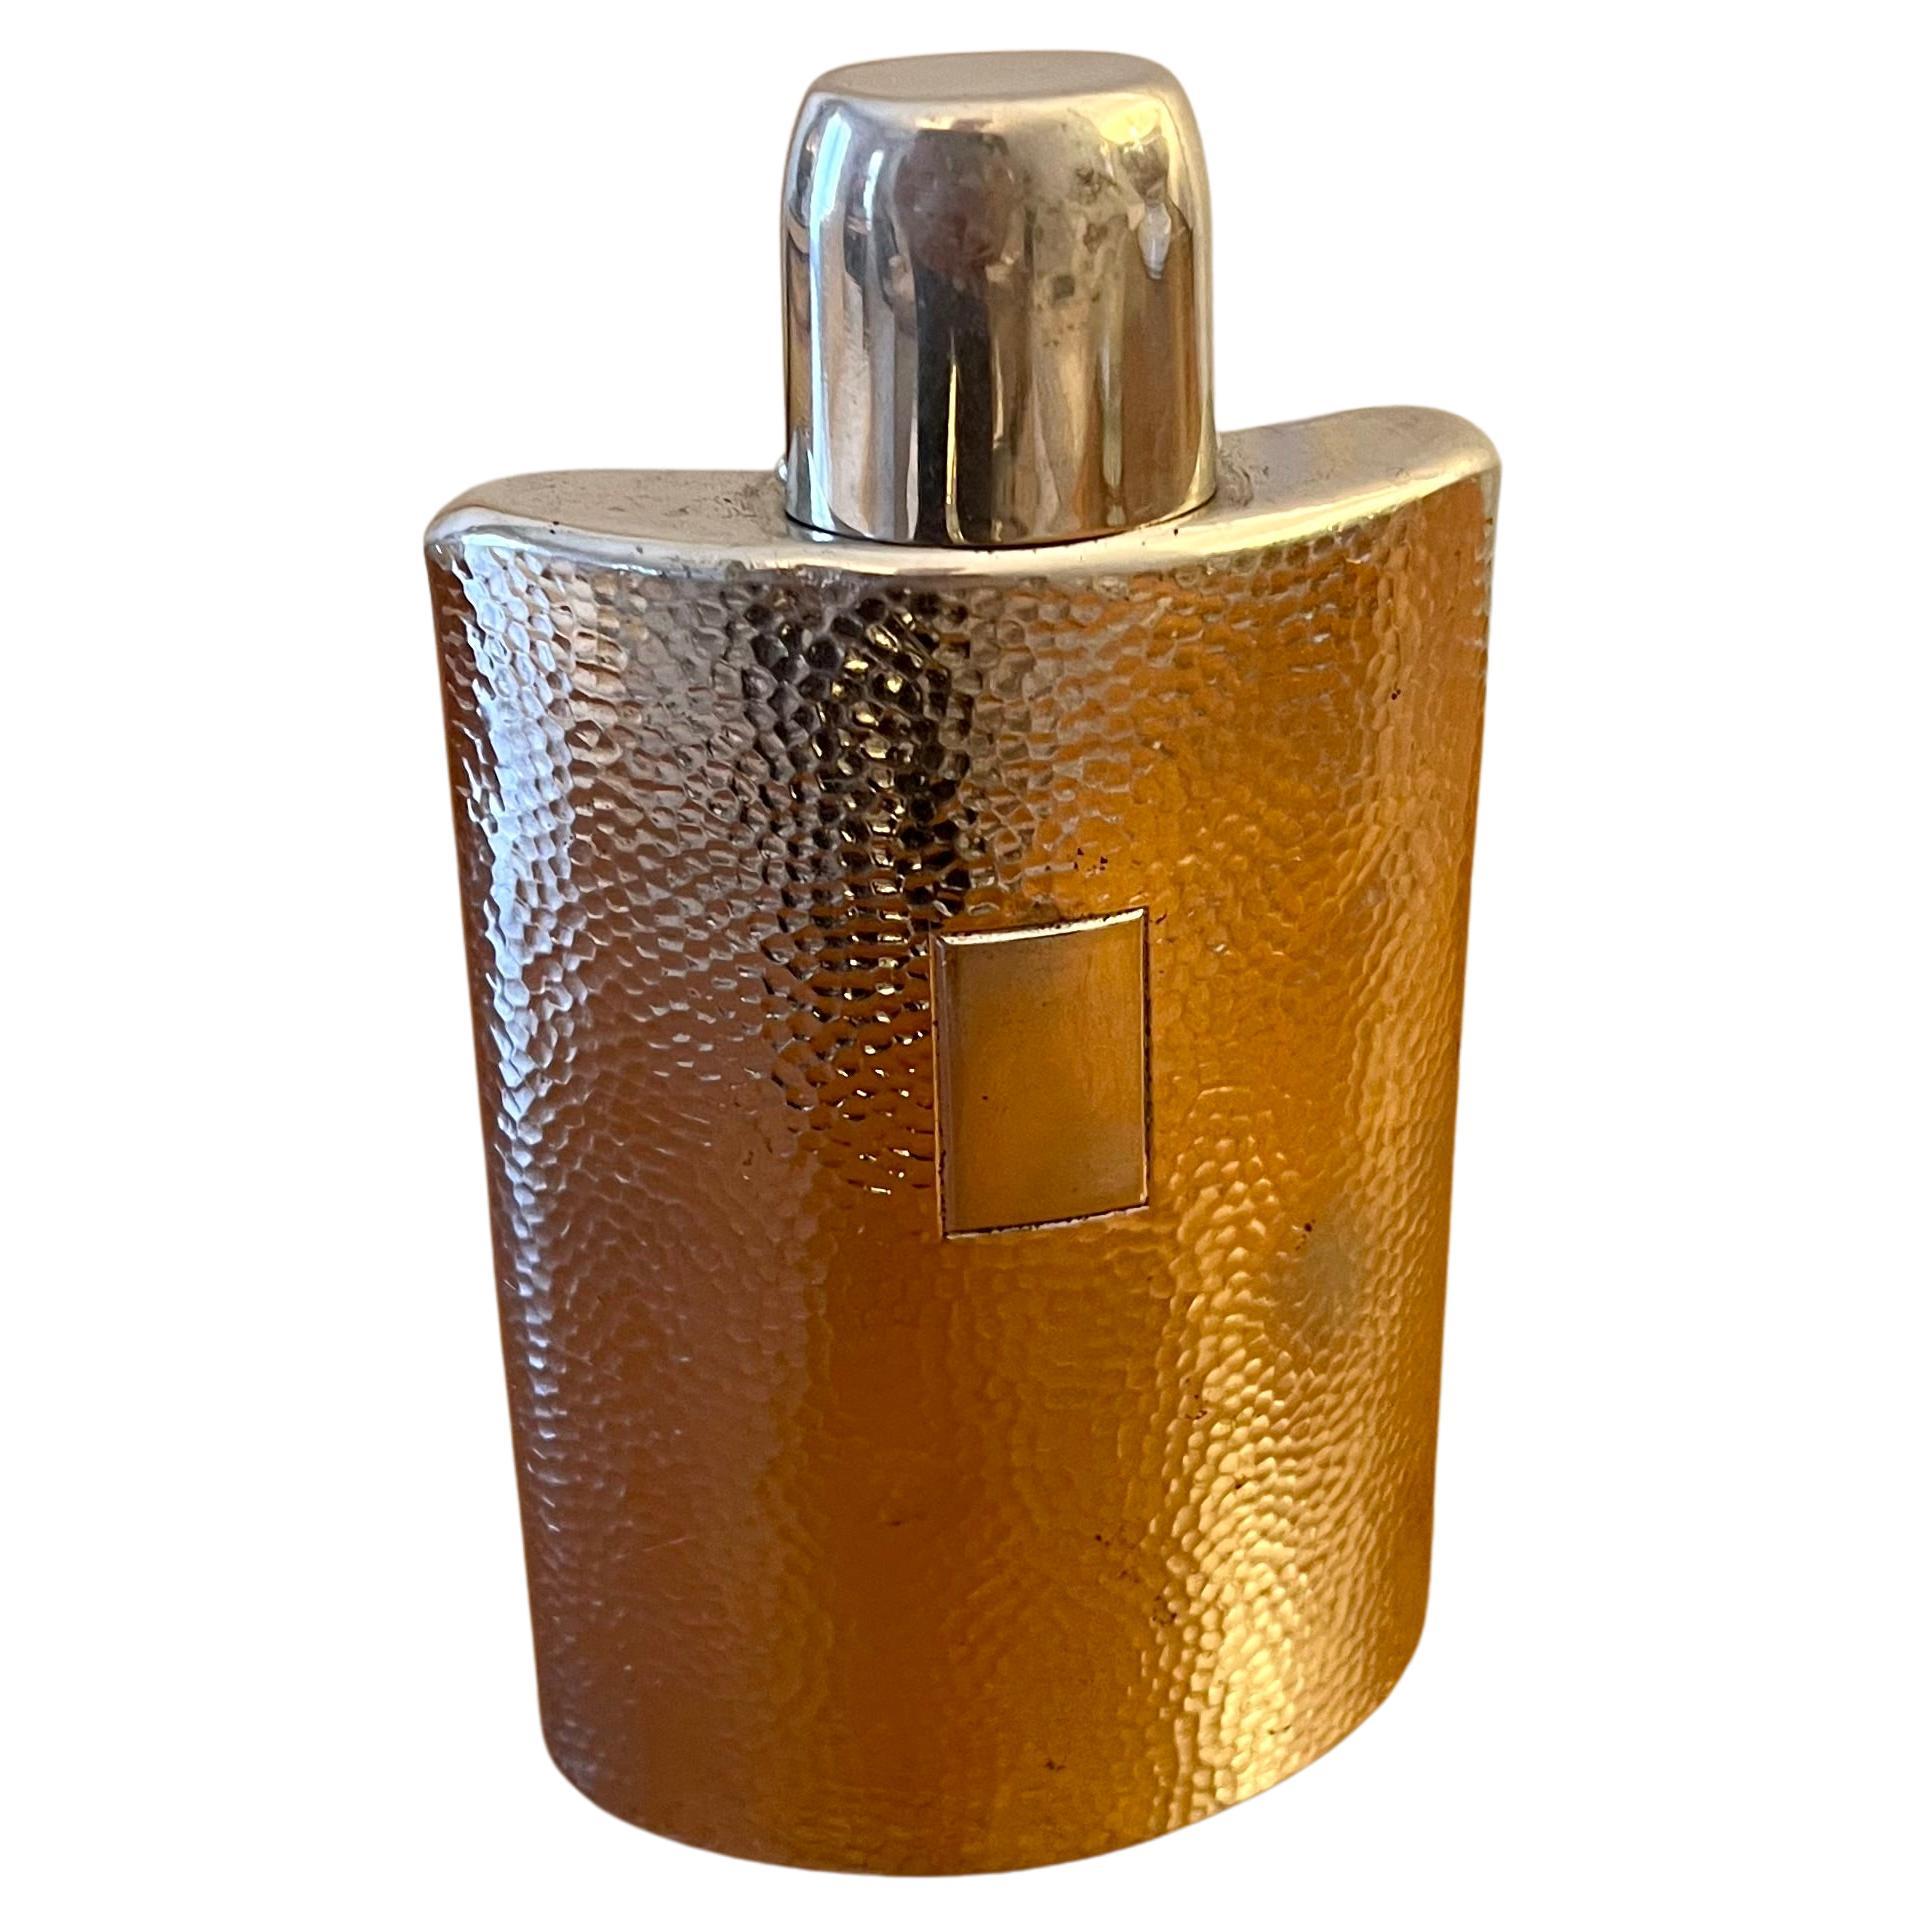 This hammered silver-plate hip flask catches light beautifully. This unique flask has a removable lid that becomes a drinking cup. 

The flask opens with a second stopper. The stopper screws on - the cork which fitted into the opening has worn away